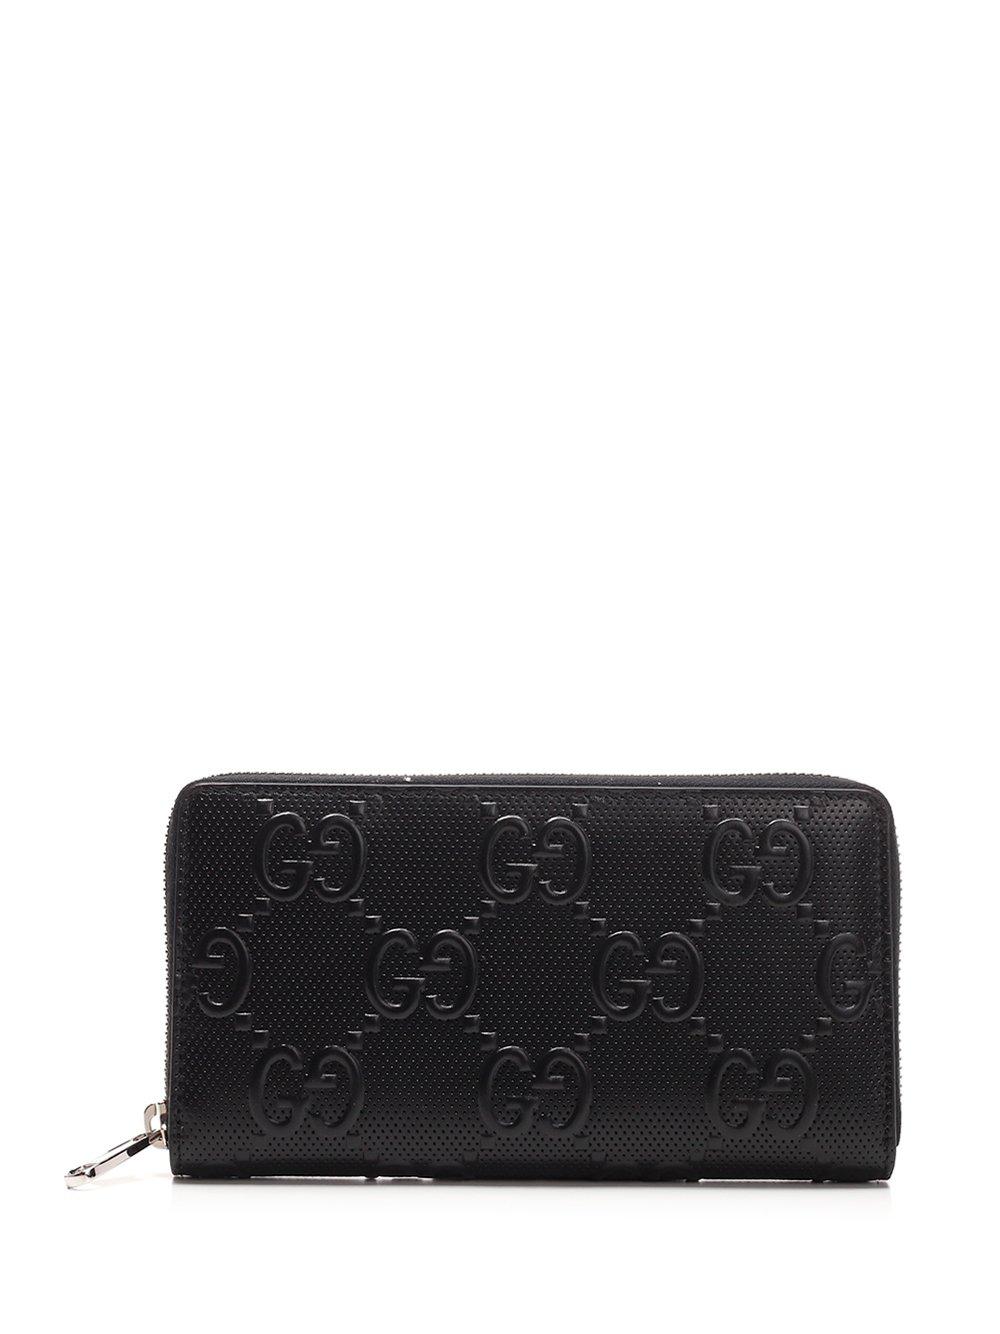 Gucci Leather GG Embossed Wallet in Black for Men - Lyst